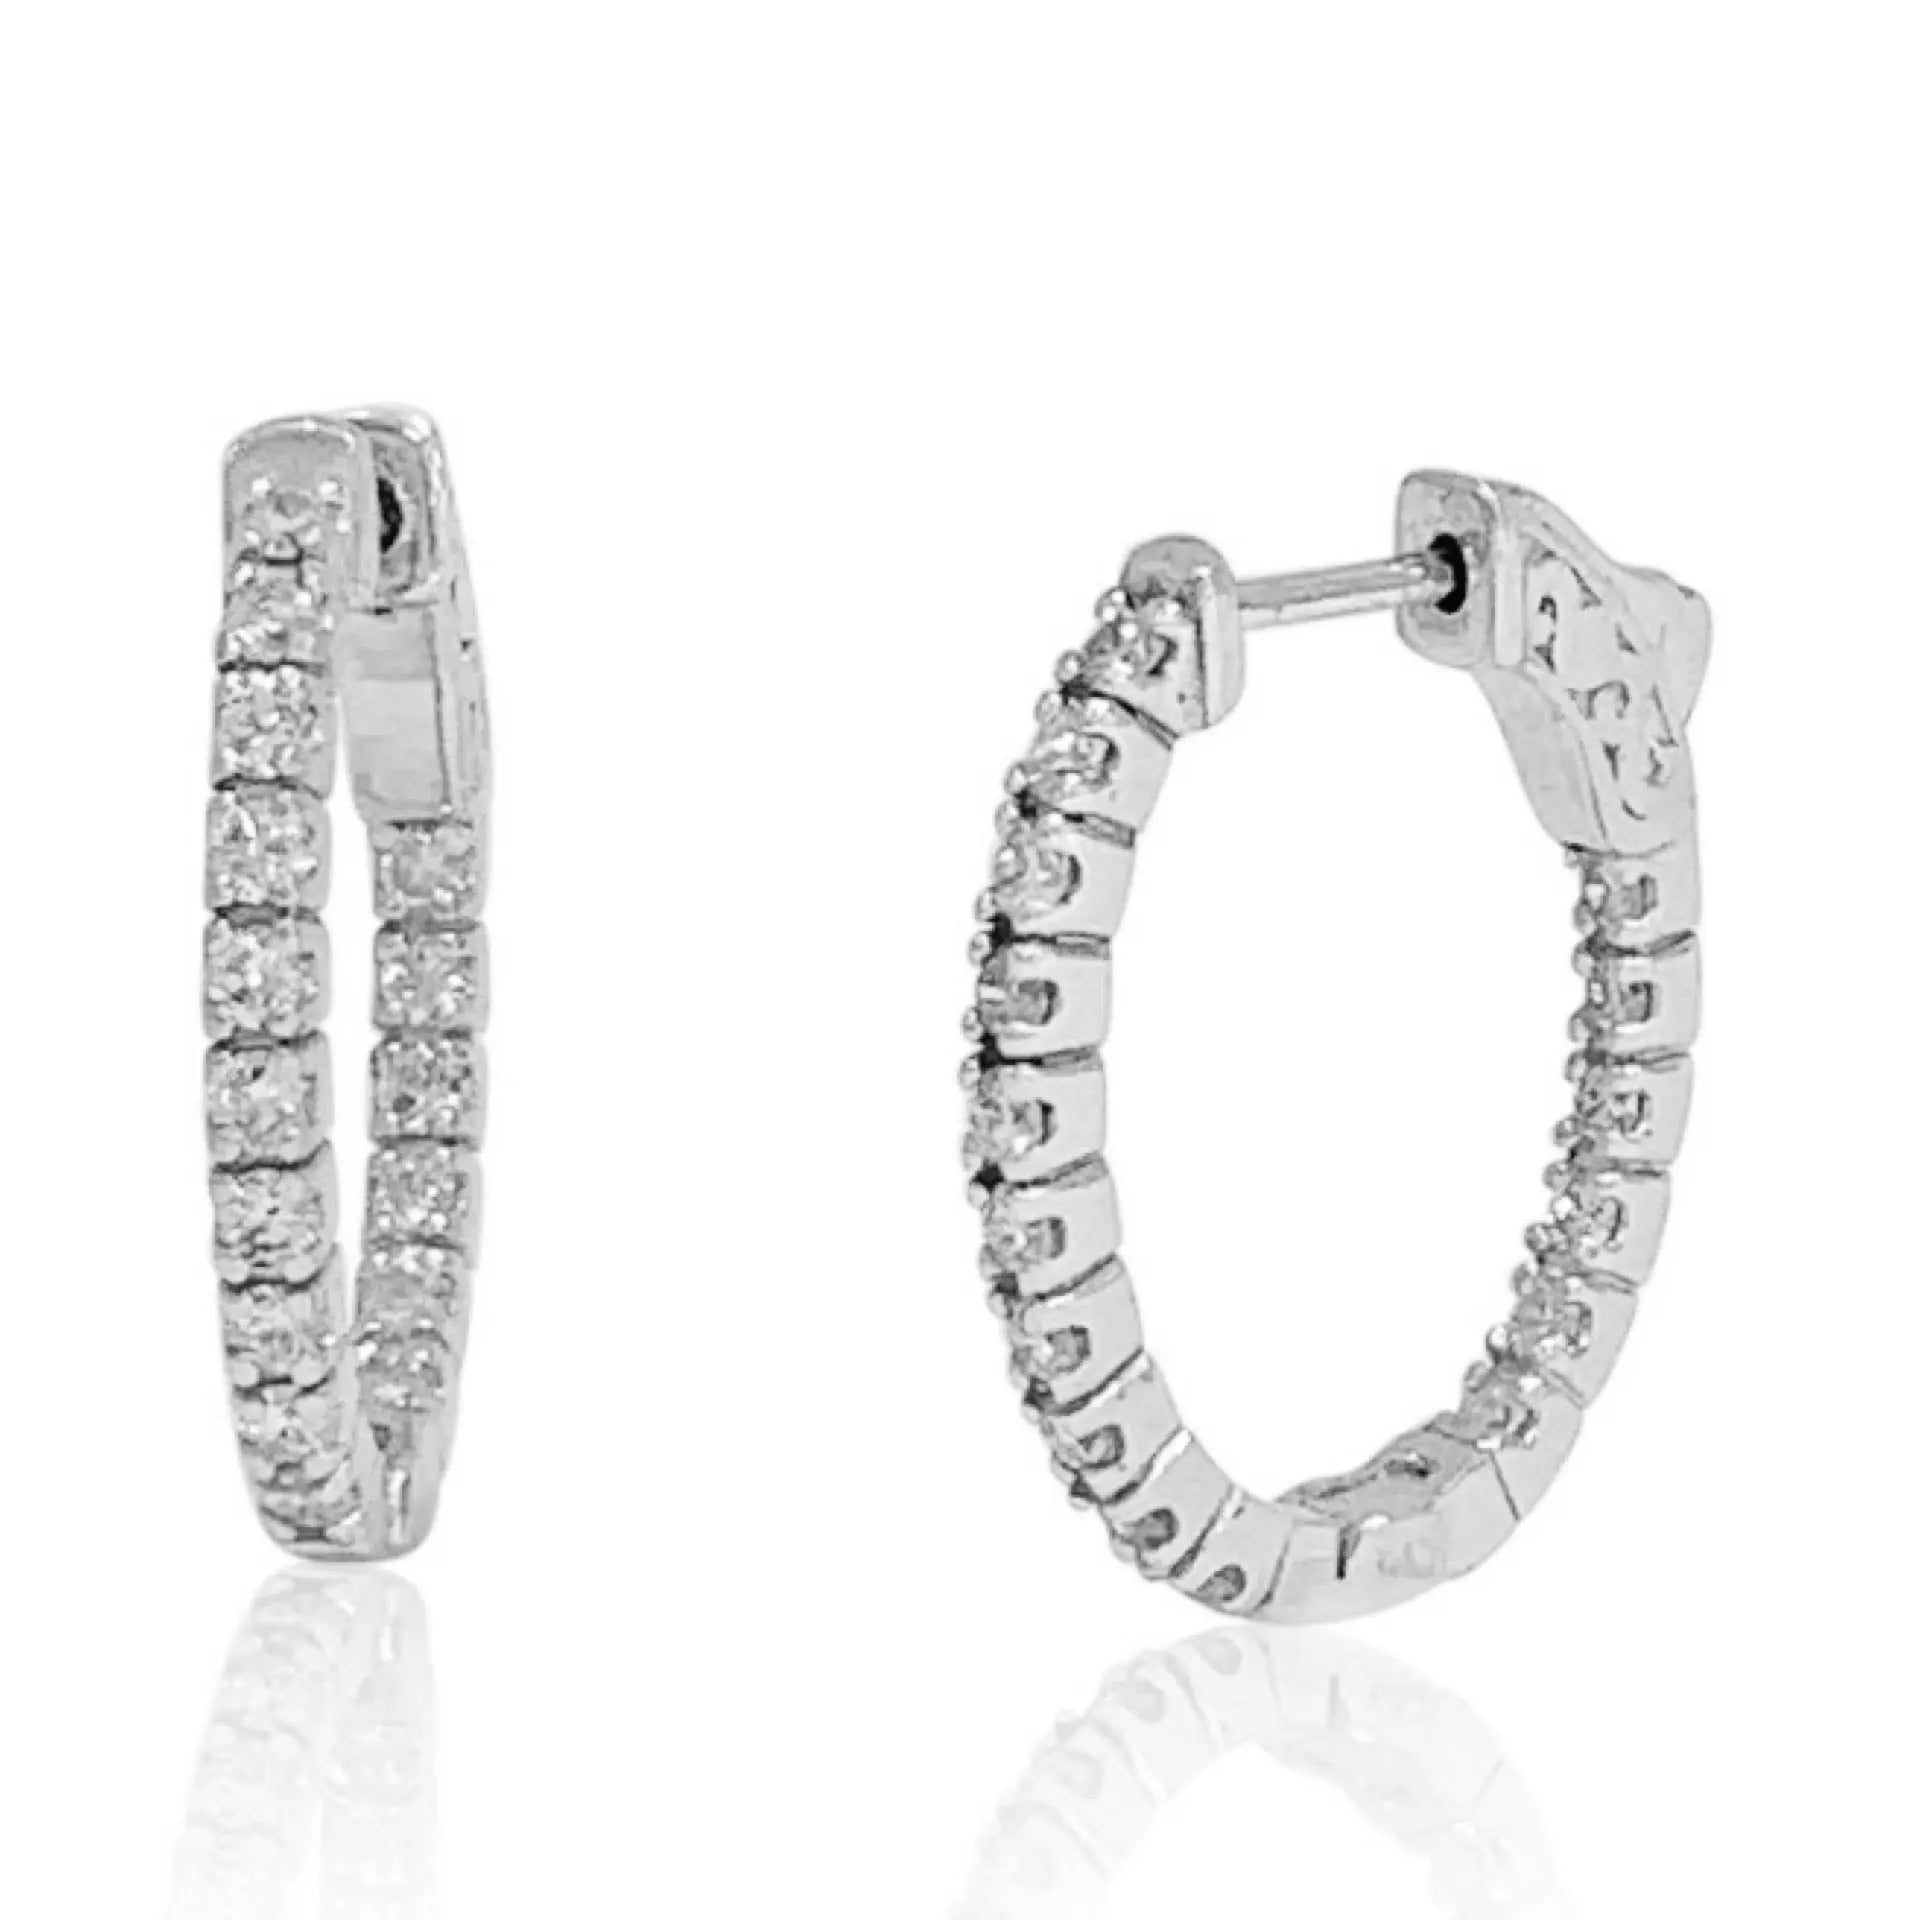 White Gold Earrings White Gold Diamond Inside And Out Hoops Danson Jewelers Danson Jewelers 